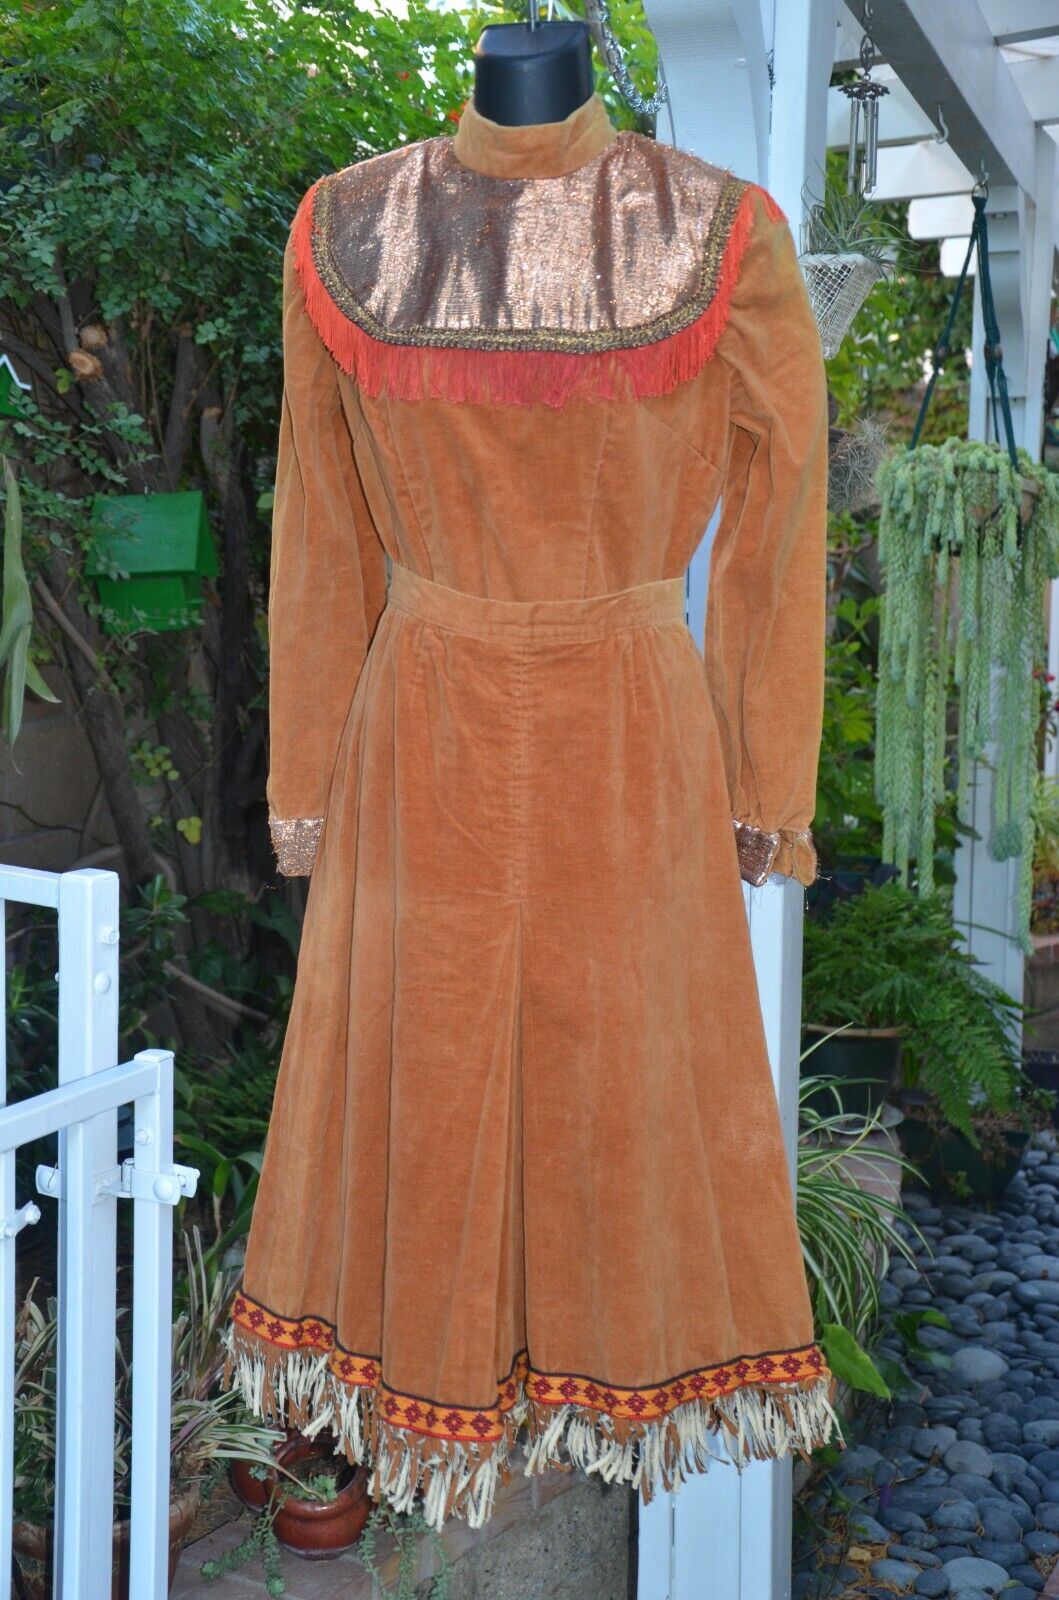 Vintage Annie Oakley cowgirl adult XS costume Used in stage performances, flashy